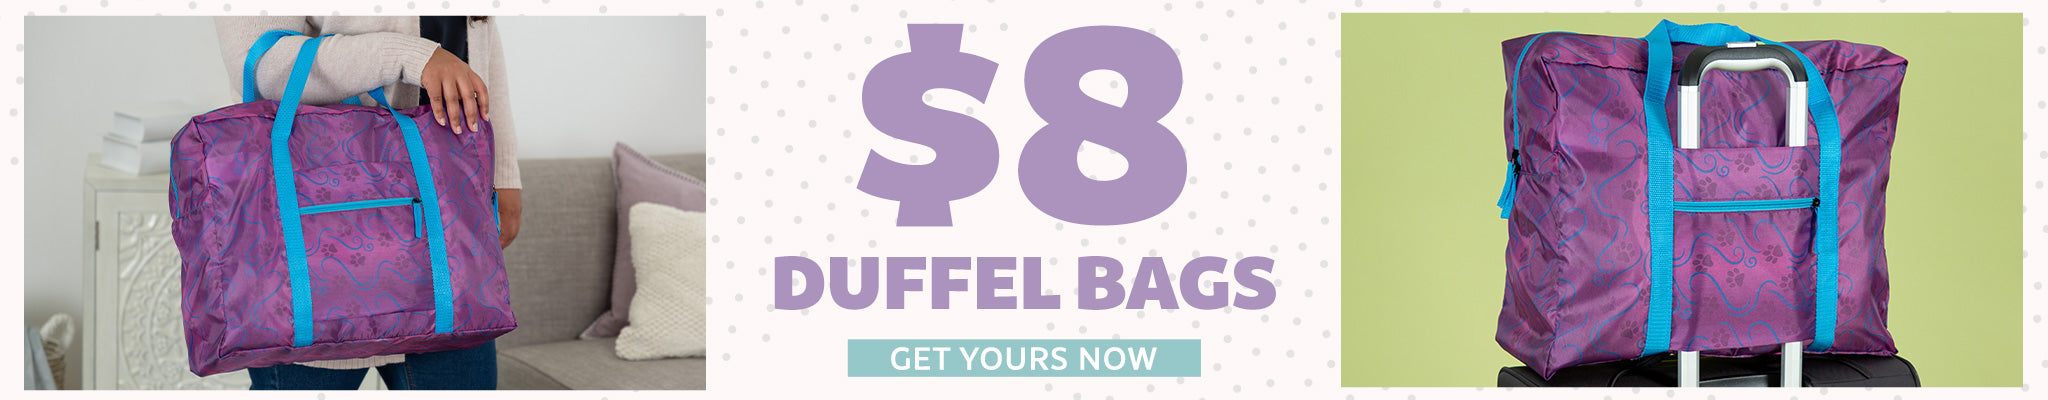 $8 Duffel Bags | Get Yours Now